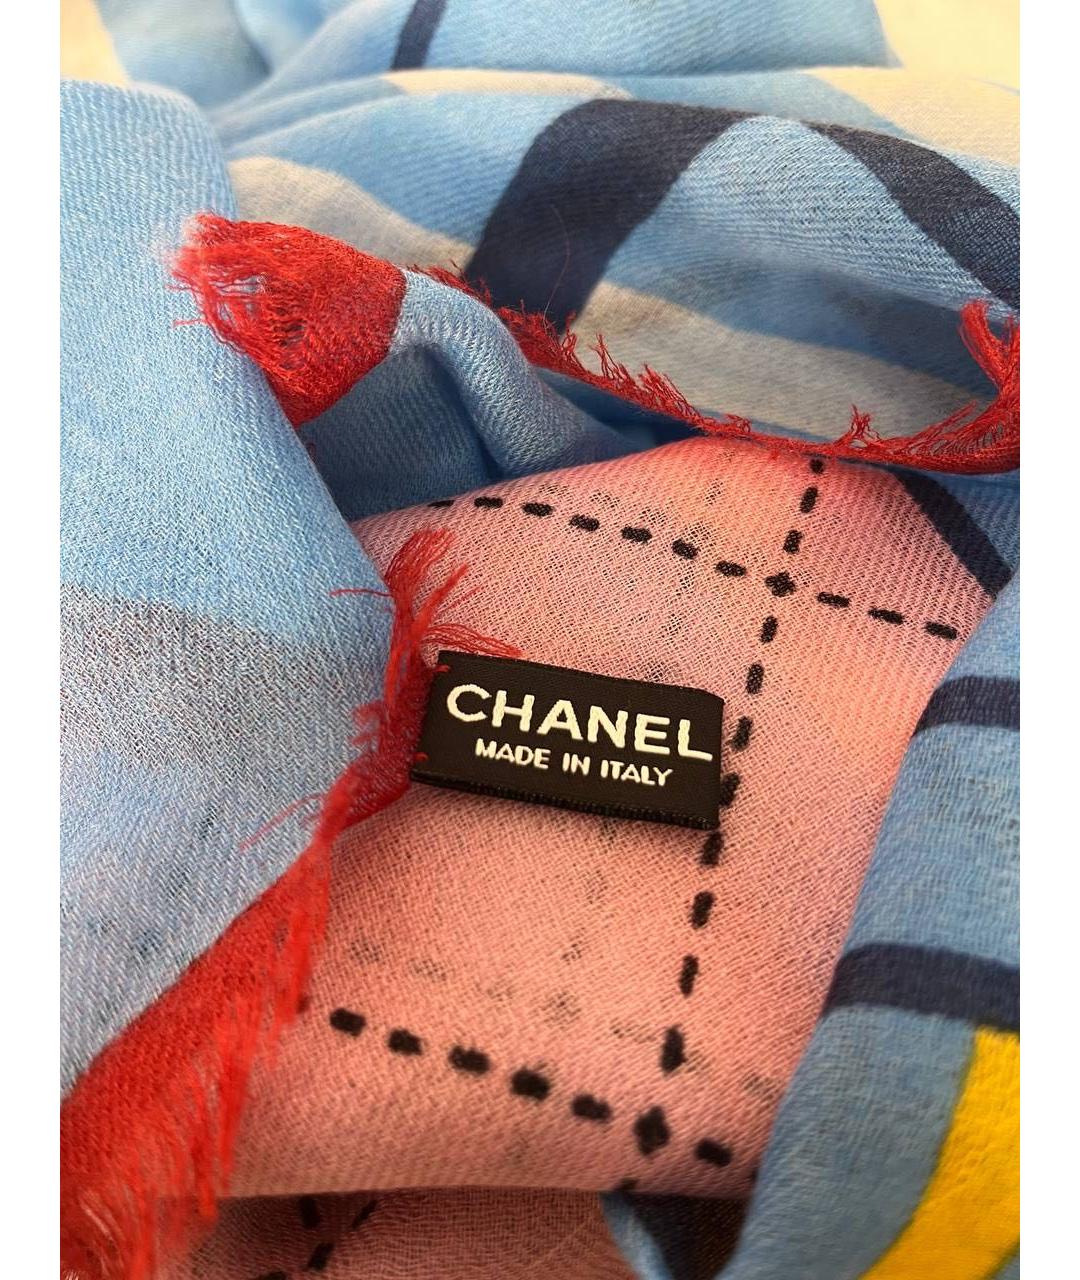 CHANEL PRE-OWNED Мульти кашемировый платок, фото 3